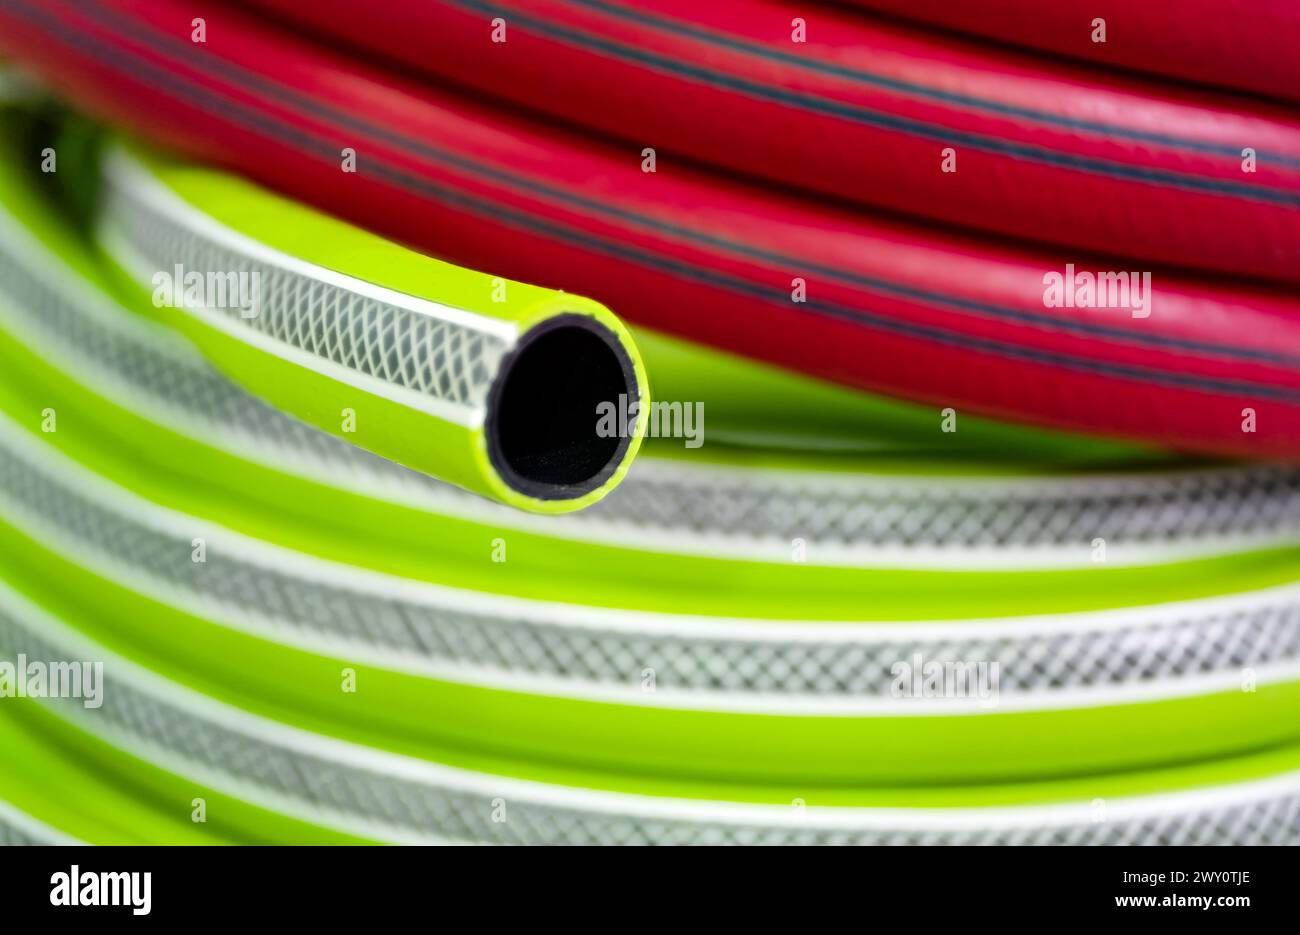 Rolled up colourful garden hose, red and green, close-up shot, selective focus, abstract gardening background Stock Photo